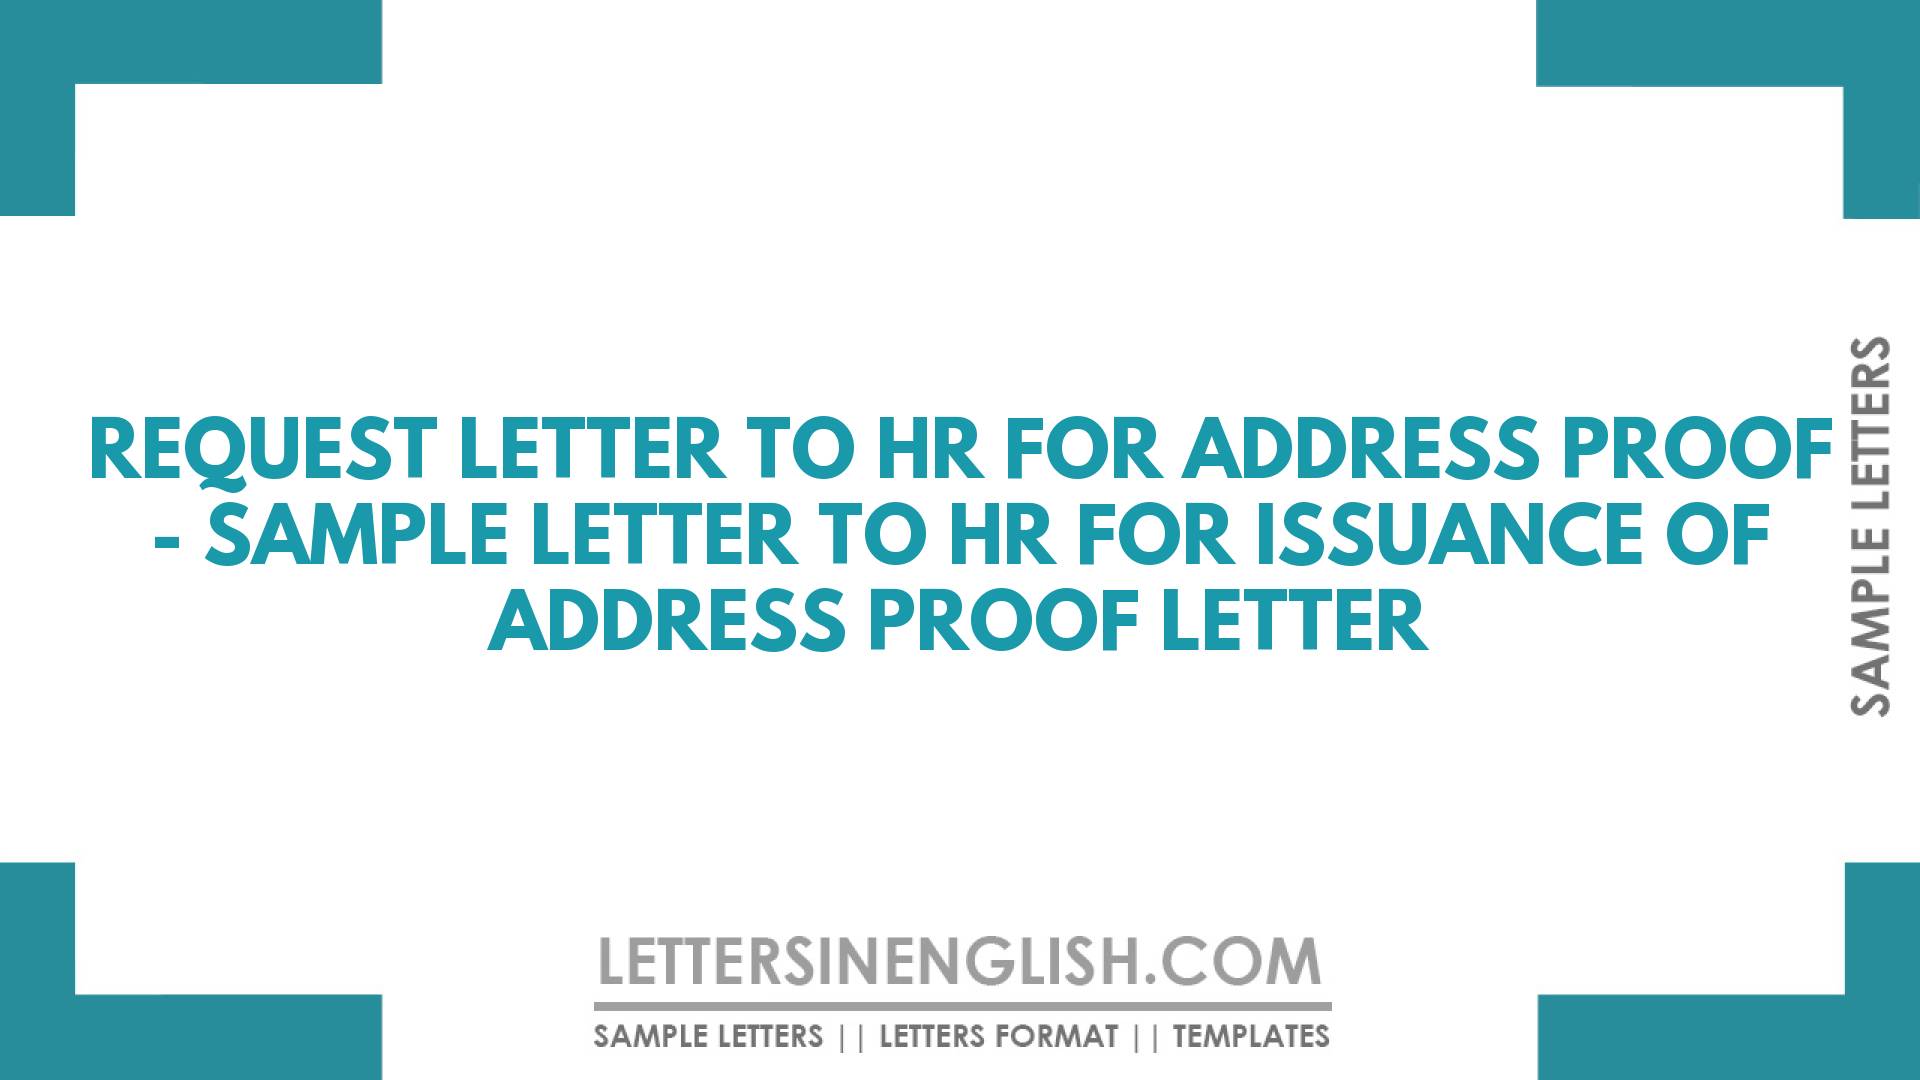 Request Letter to HR for Address Proof – Sample Letter to HR for Issuance of Address Proof Letter